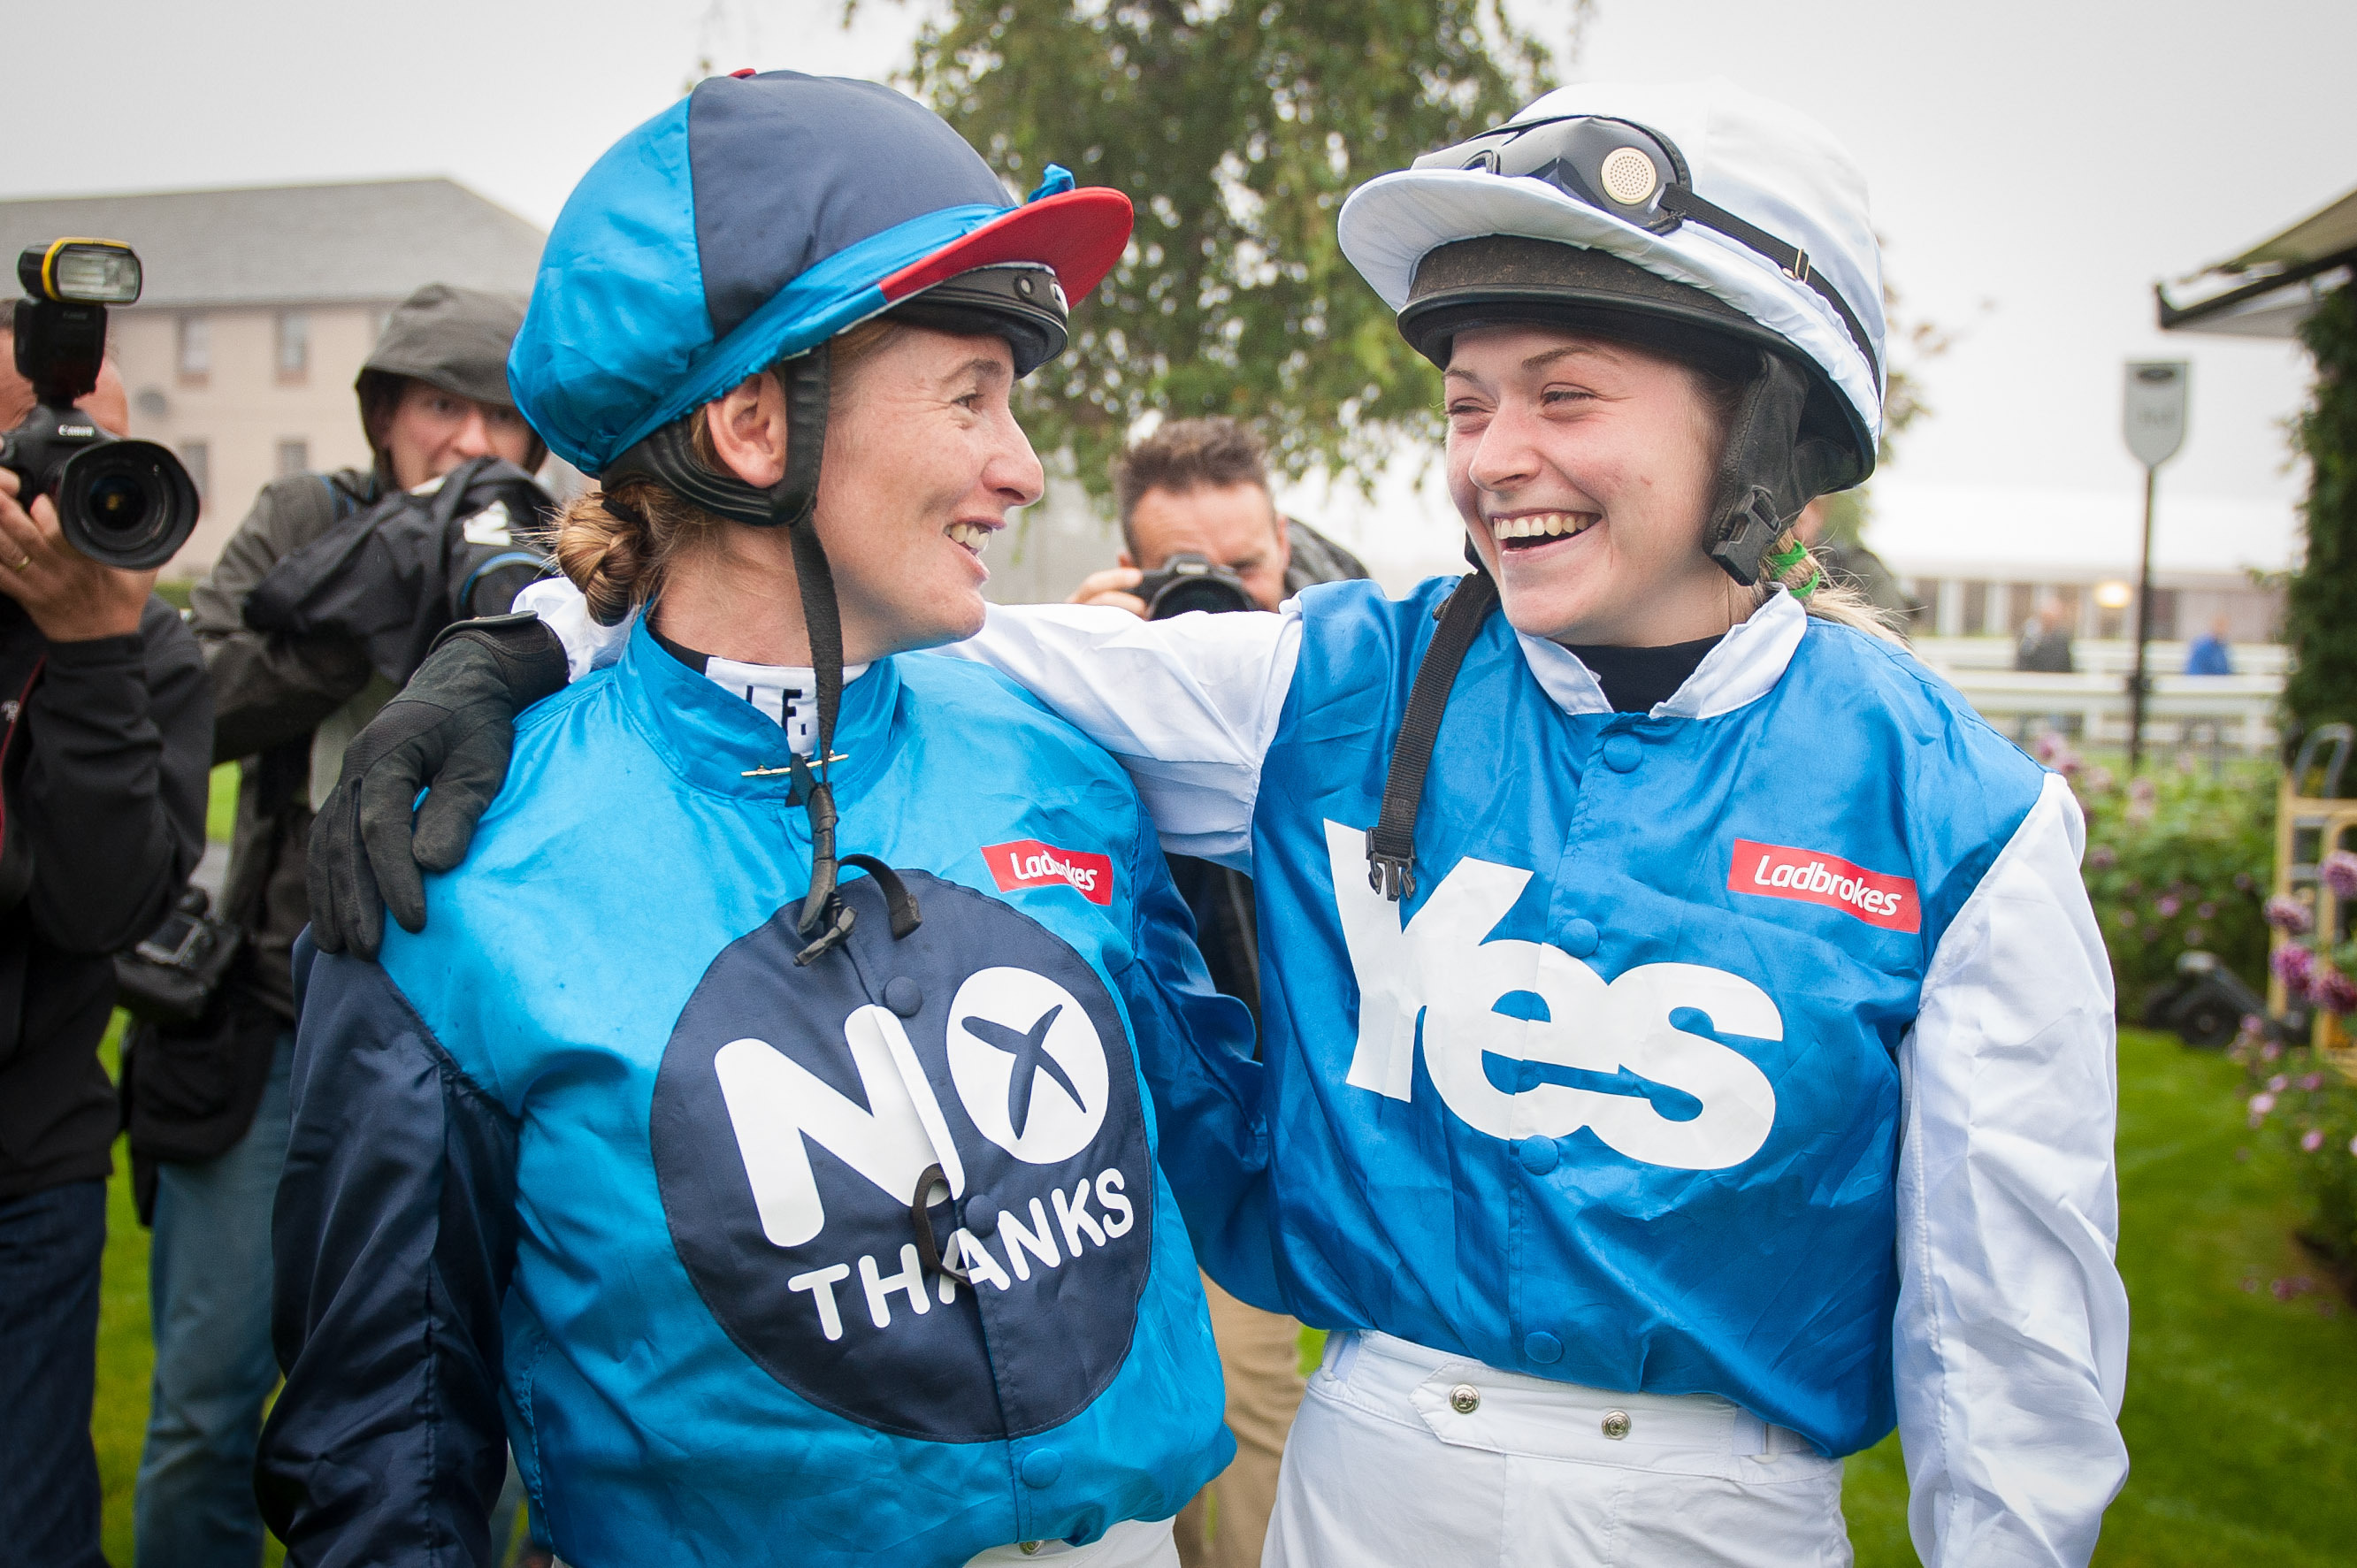 Jockeys Carol Bartley (left) and Rachel Grant, who rode No and Yes horses respectively, in a two-horse race at Musselburgh racecourse, in the Ladbrokes sponsored, Referendum Race.